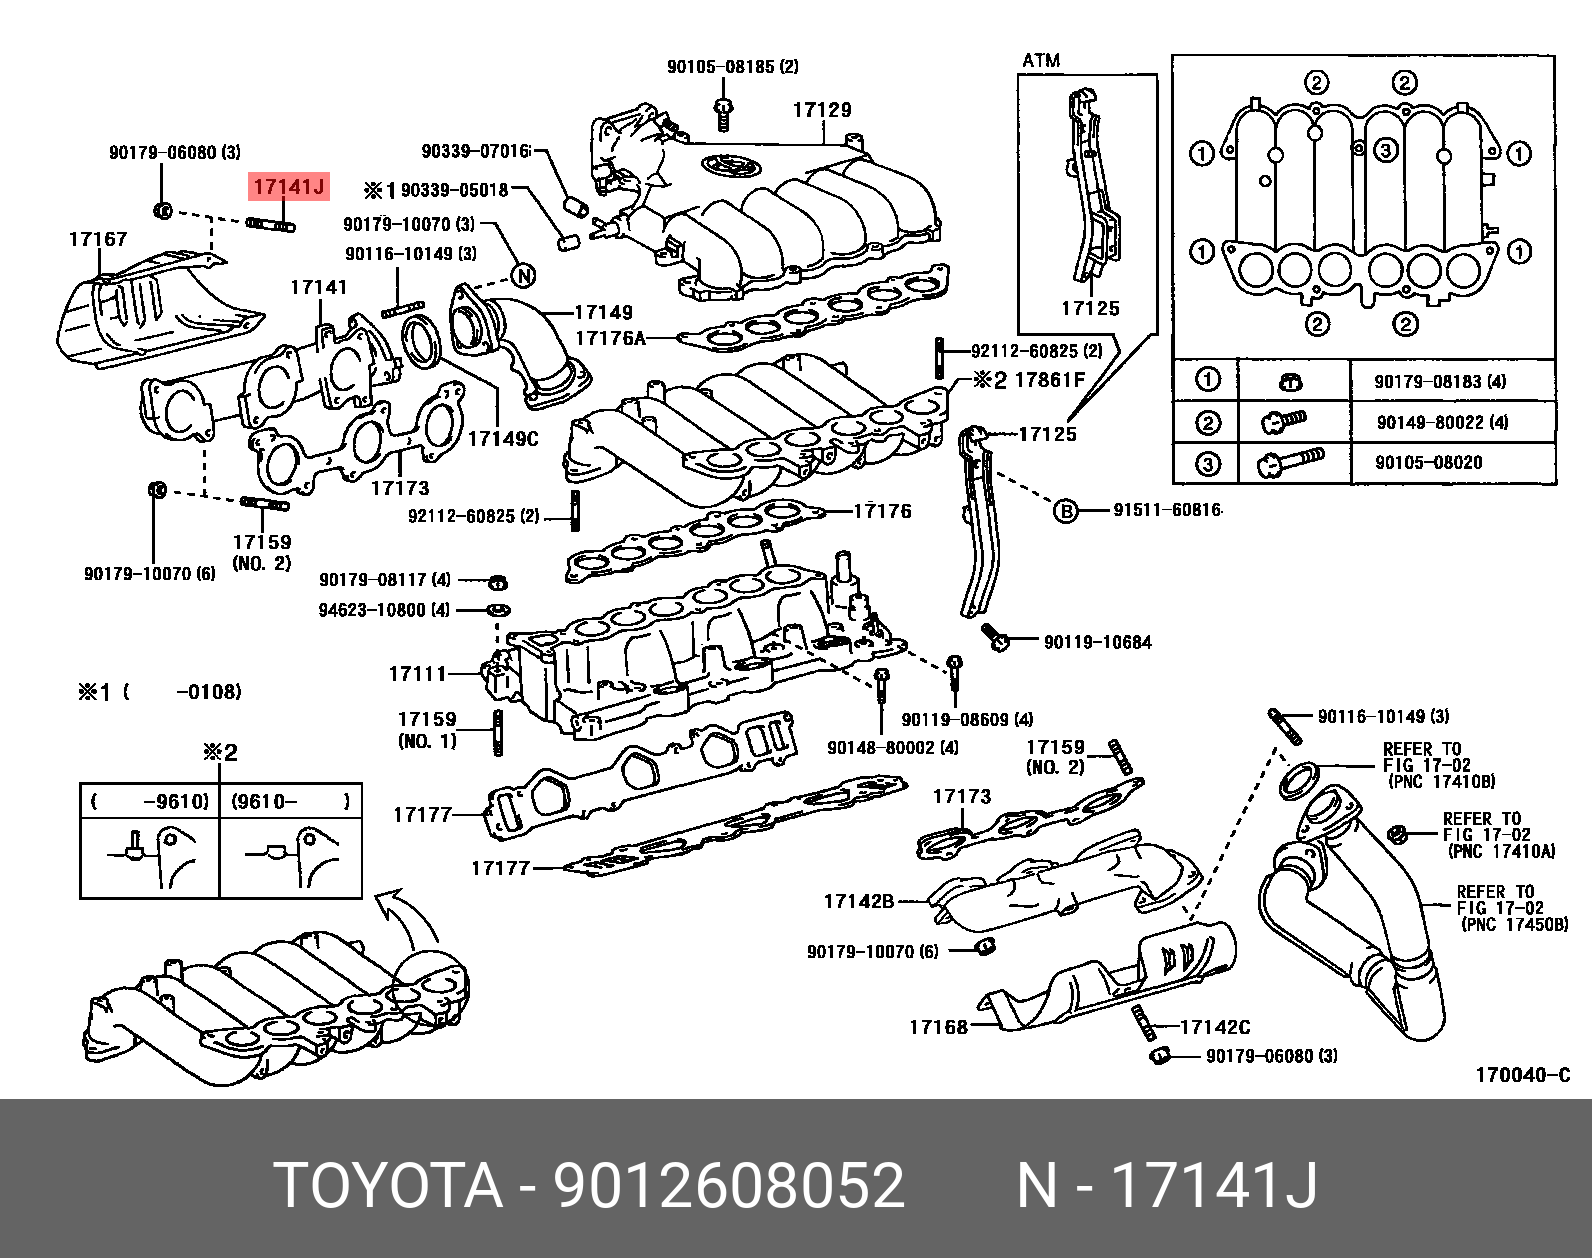 PRIUS 201511 -, BOLT, STUD(FOR MANIFOLD TO CYLINDER HEAD)